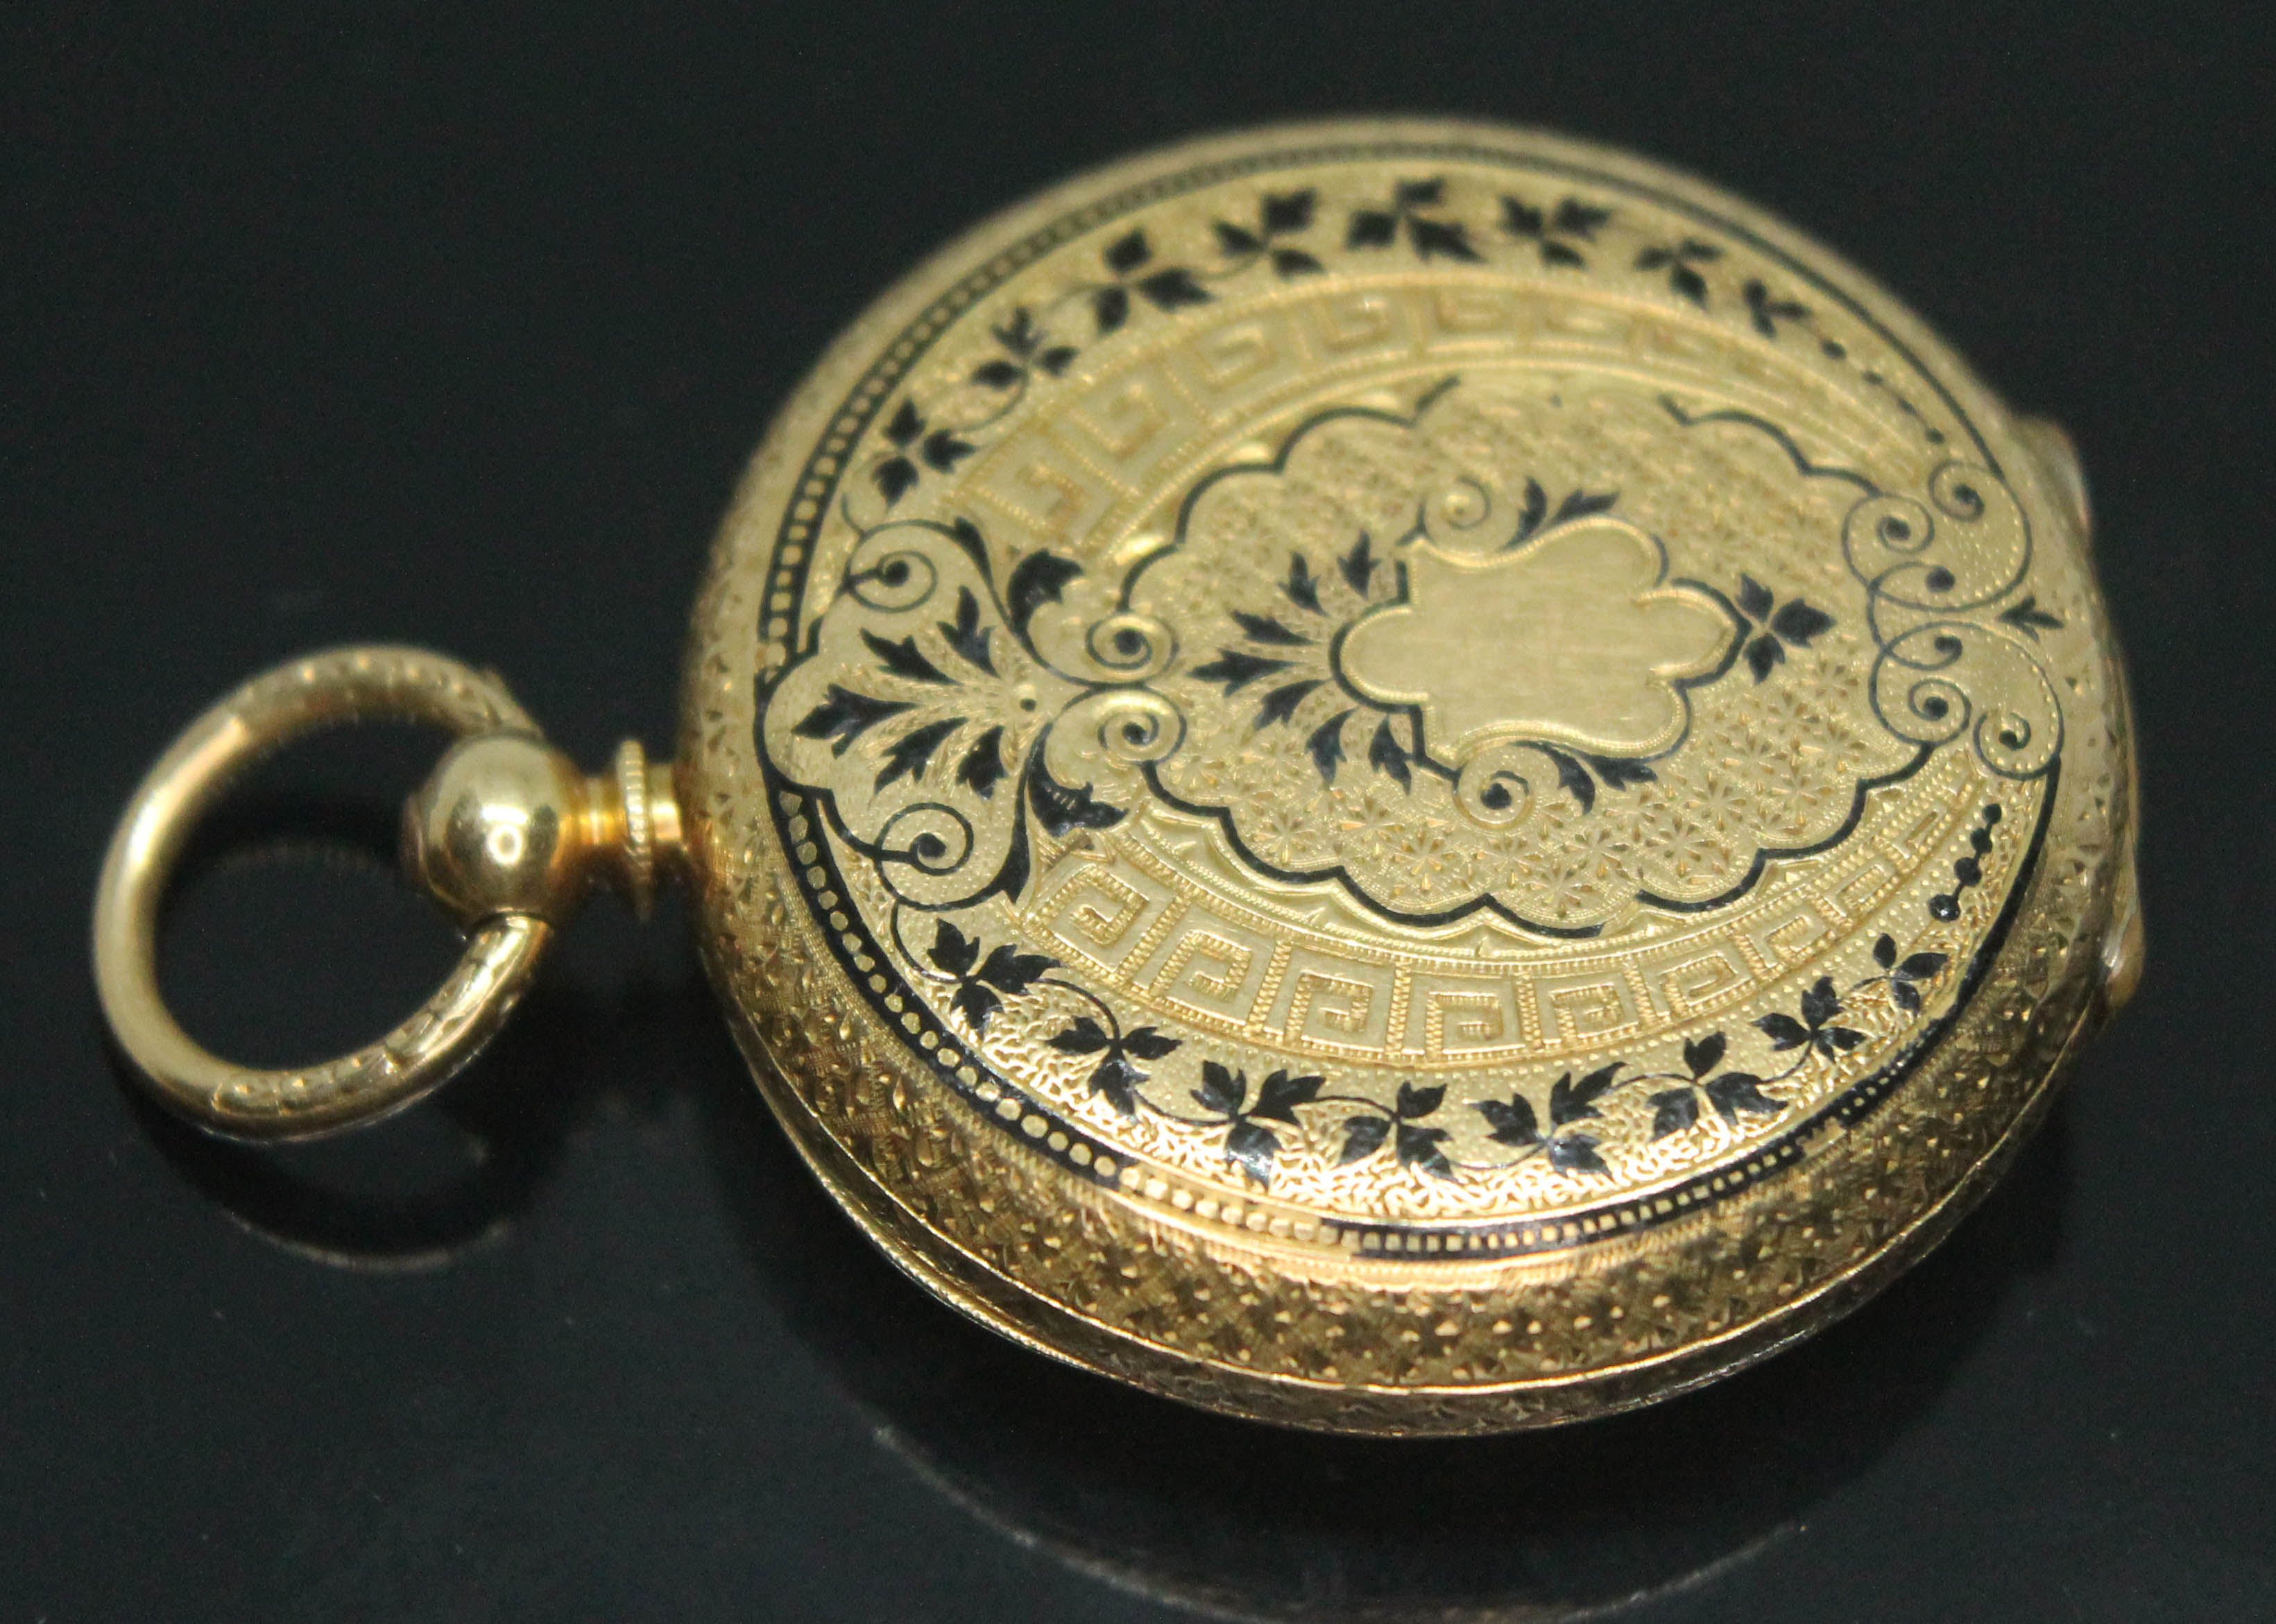 A ladies bright engraved pocket watch, marked '18K', diam. 32mm, gross wt. 26.67g.